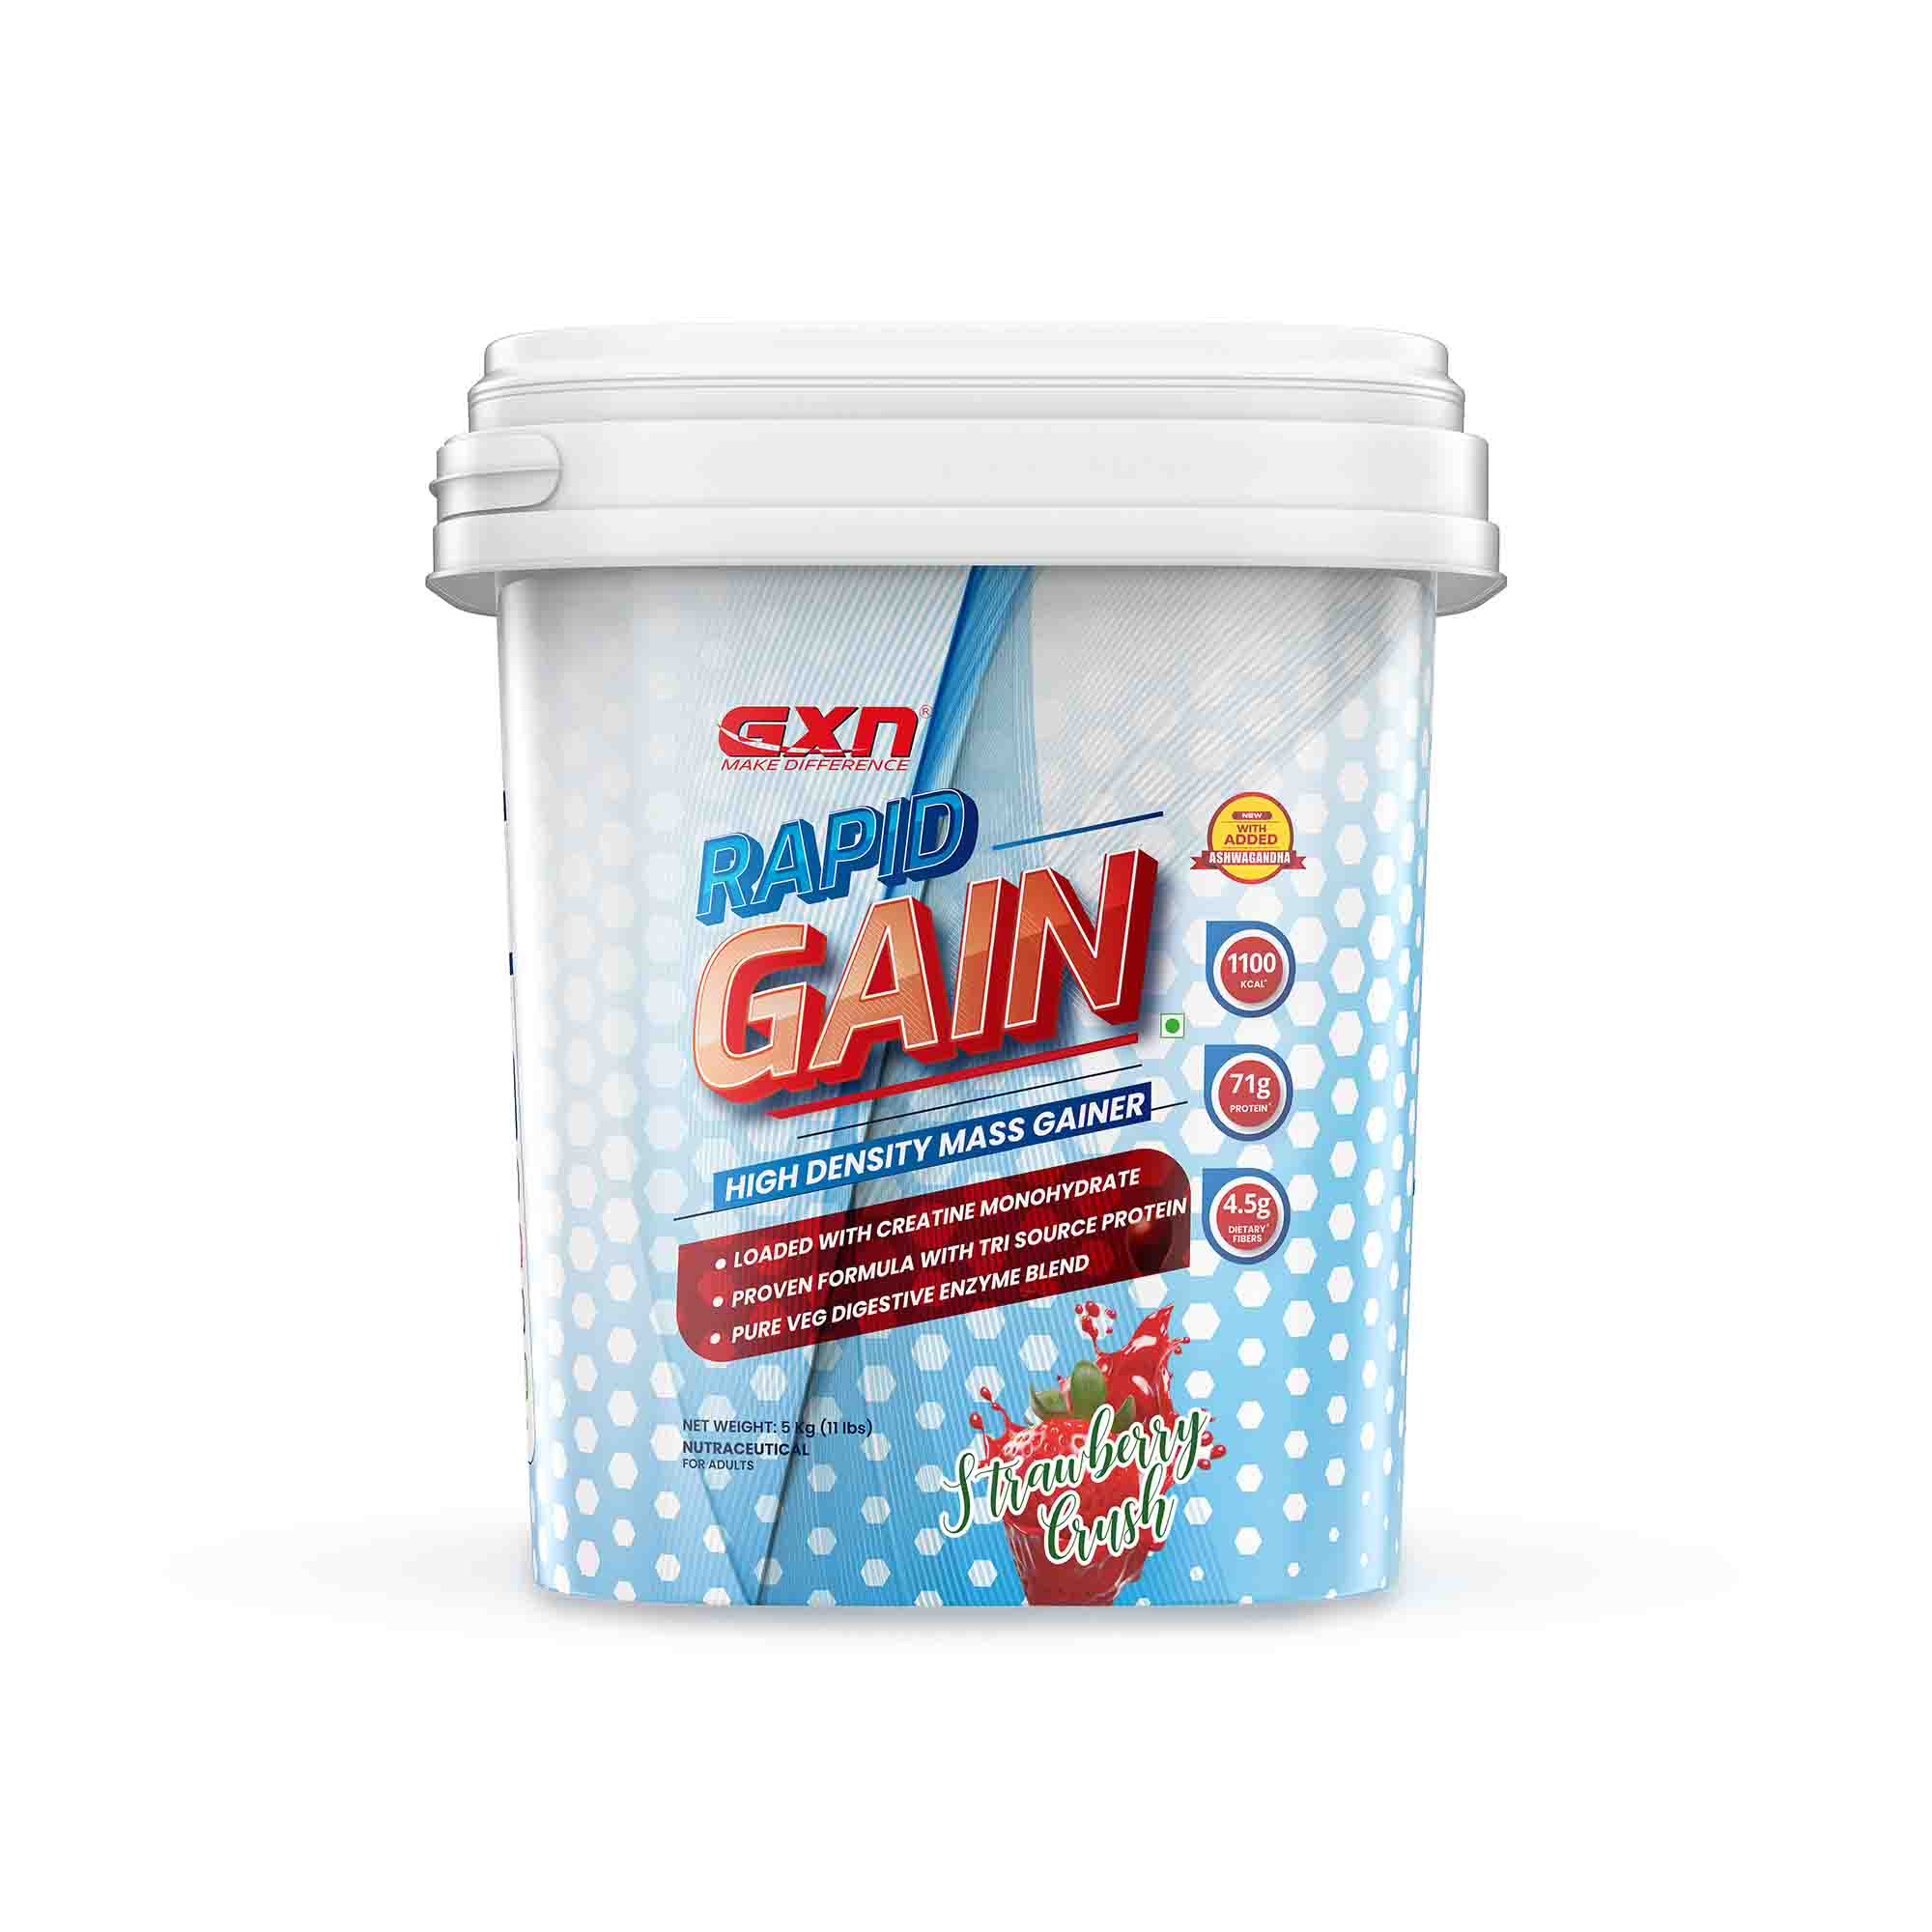 GXN Gainer Powerpacked Nutrition for Superior Muscle Growt - Haryana - Gurgaon ID1522237 4